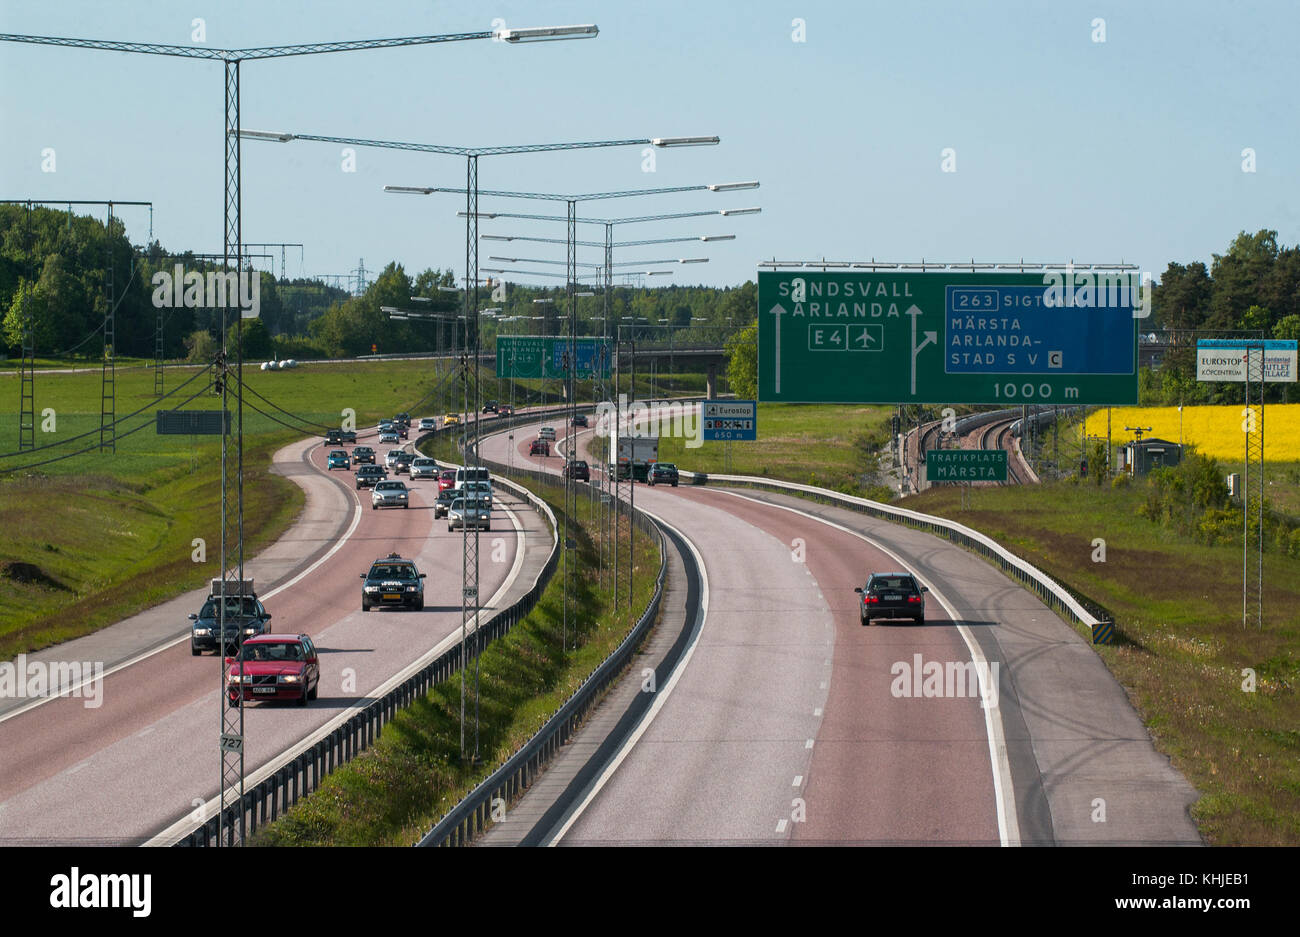 Traffic on the highway, Stockholm, Sweden. Stock Photo